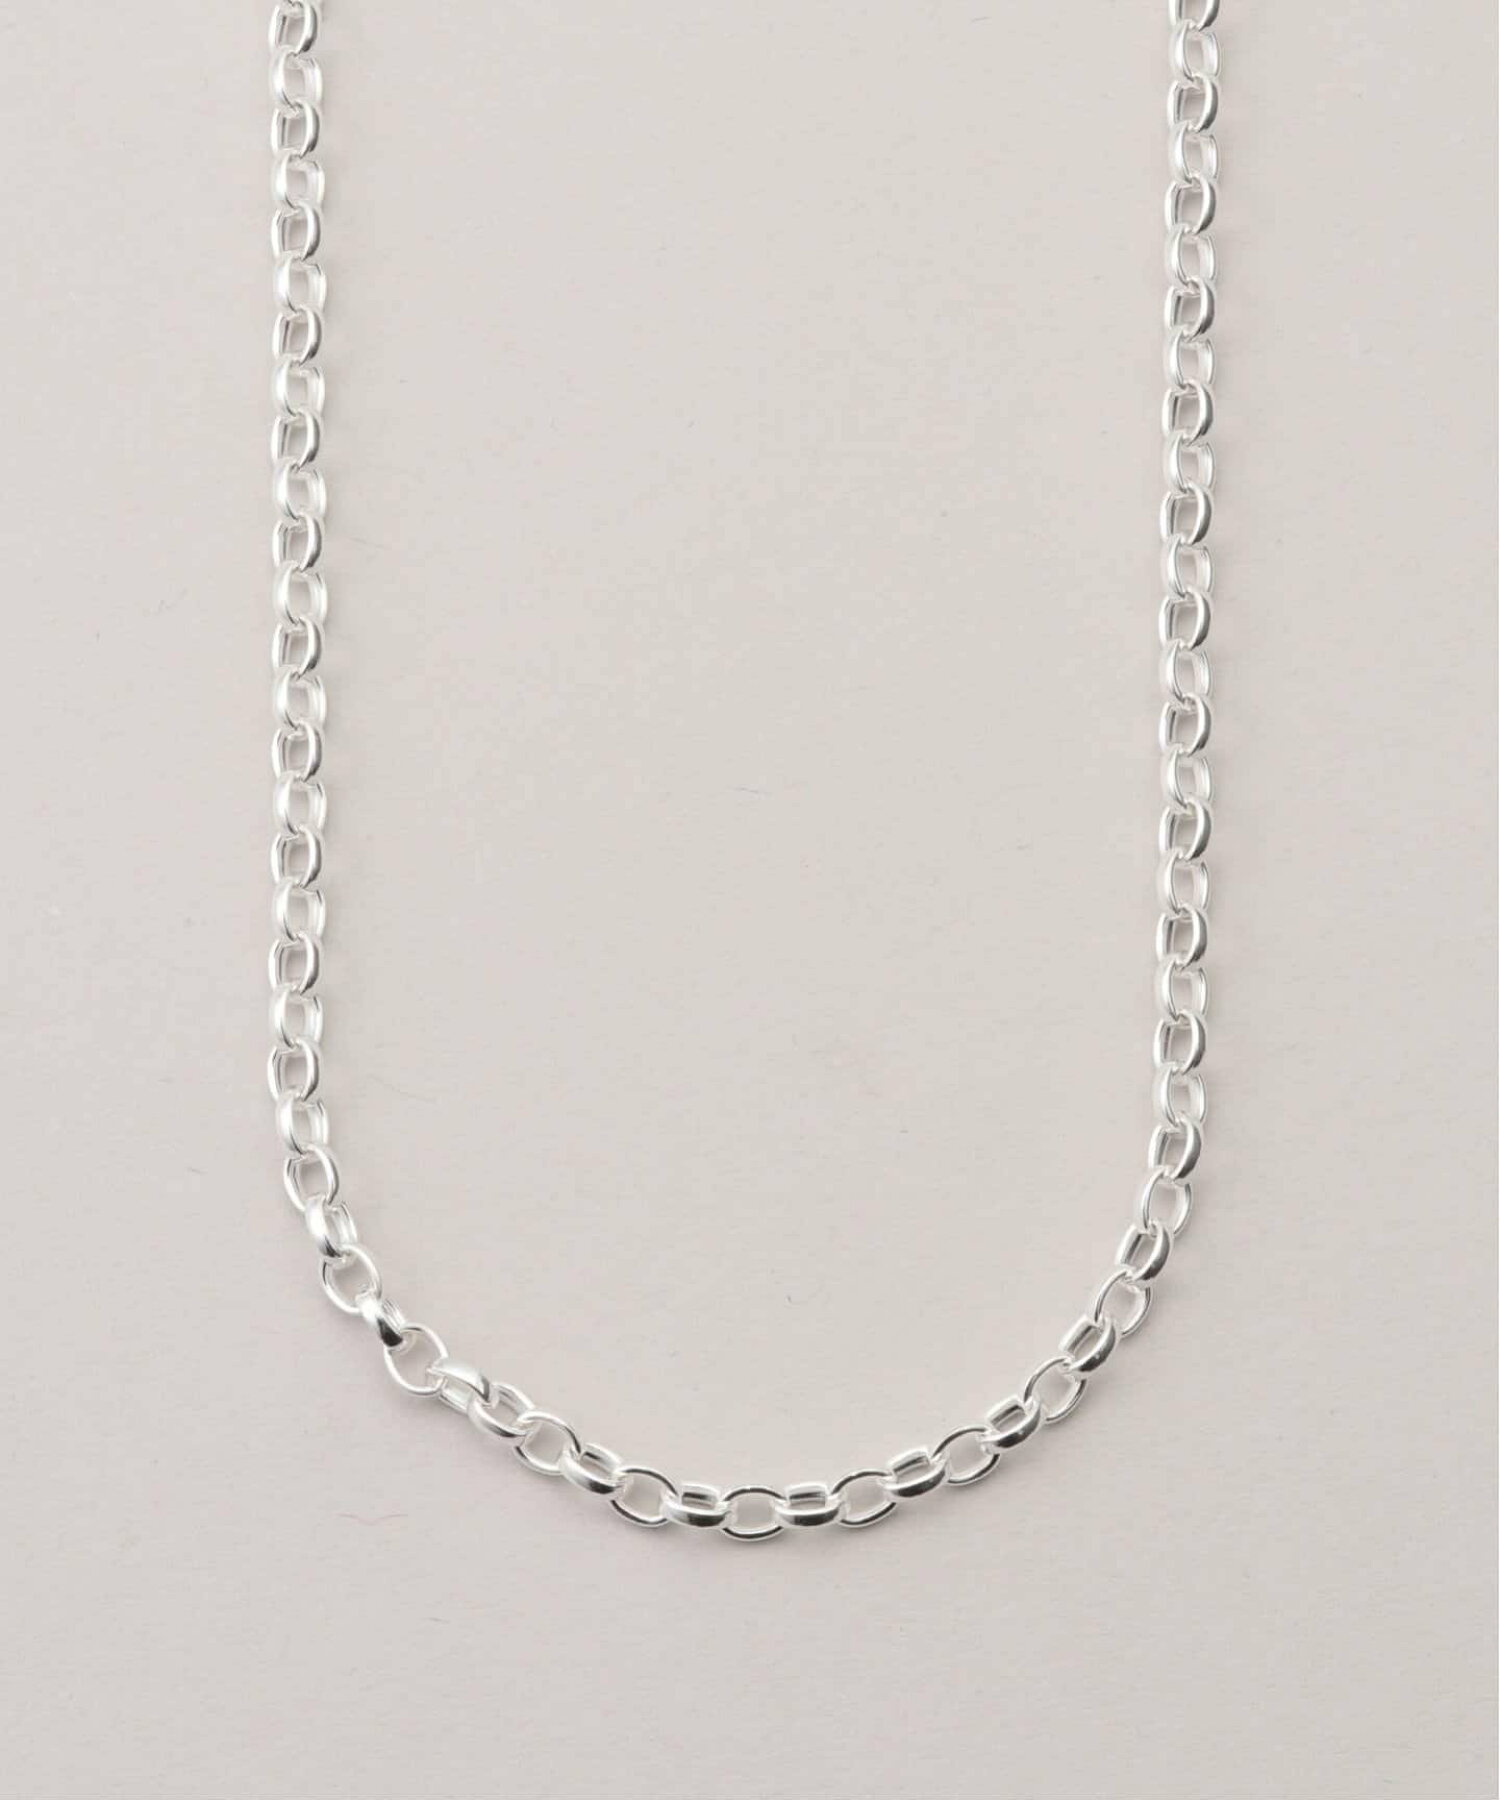 【BYSMITH バイスミス】Lolo Chain Silver Necklace 3.4mm / 45cm